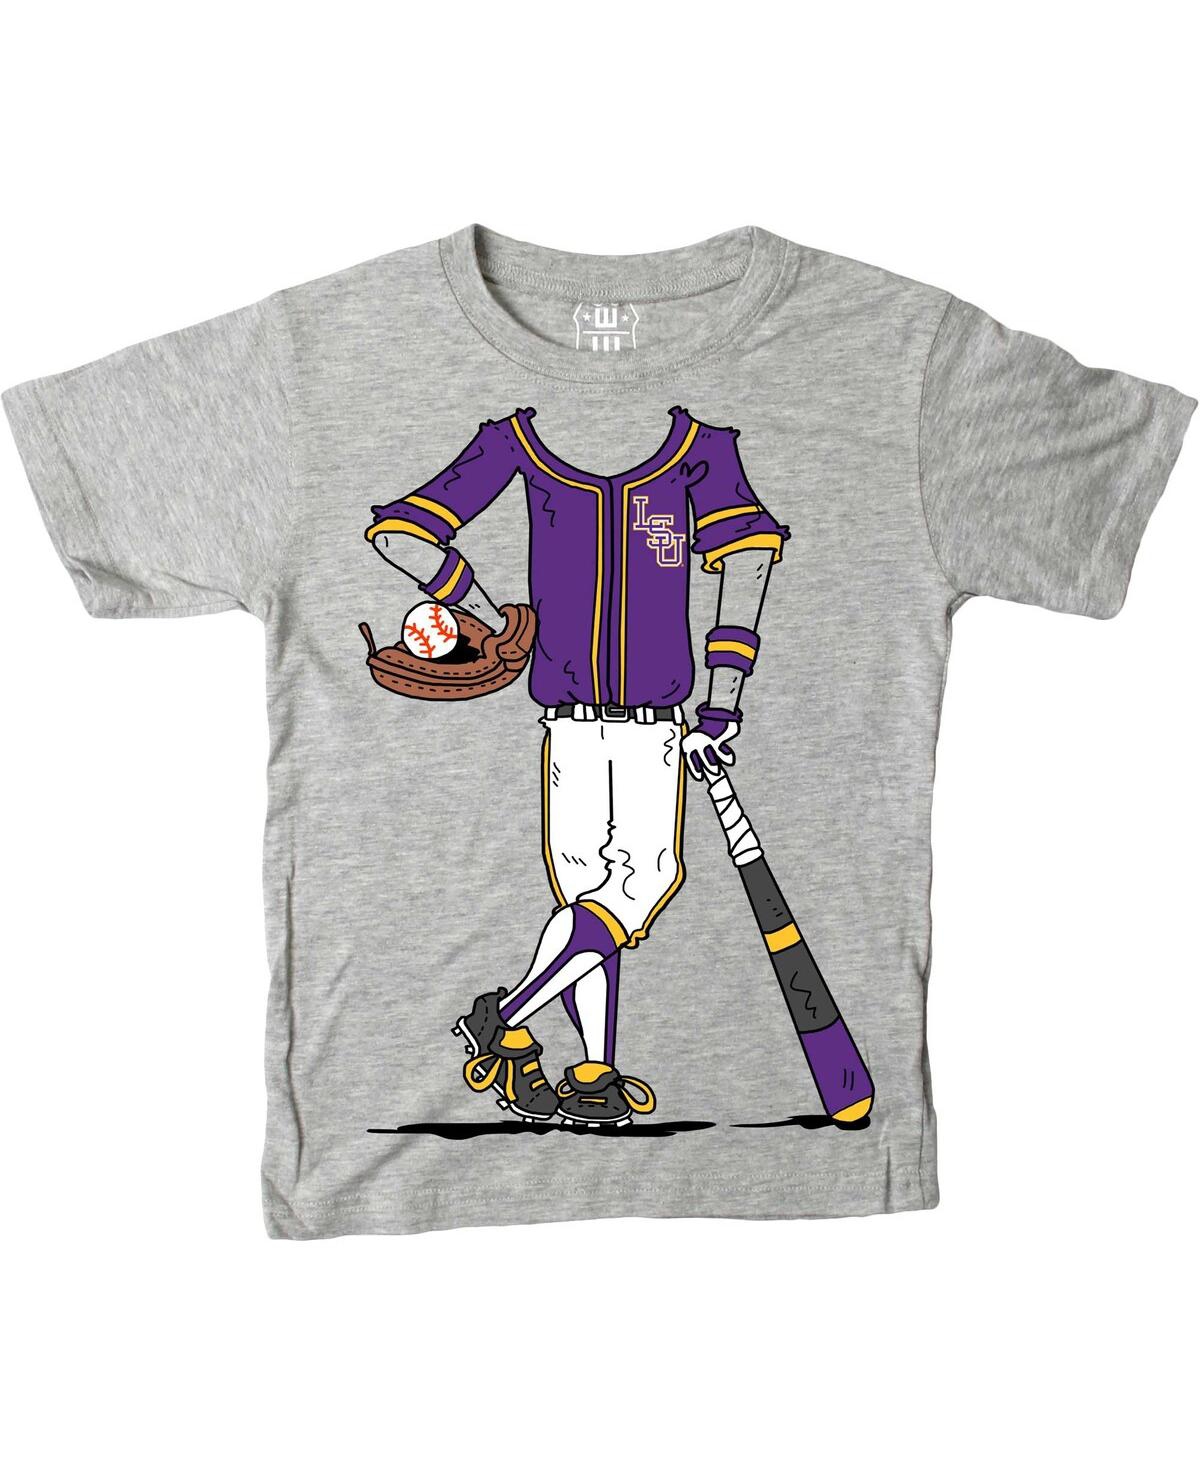 Wes Willy Youth Gray Lsu Tigers Baseball Player T-Shirt - Gray